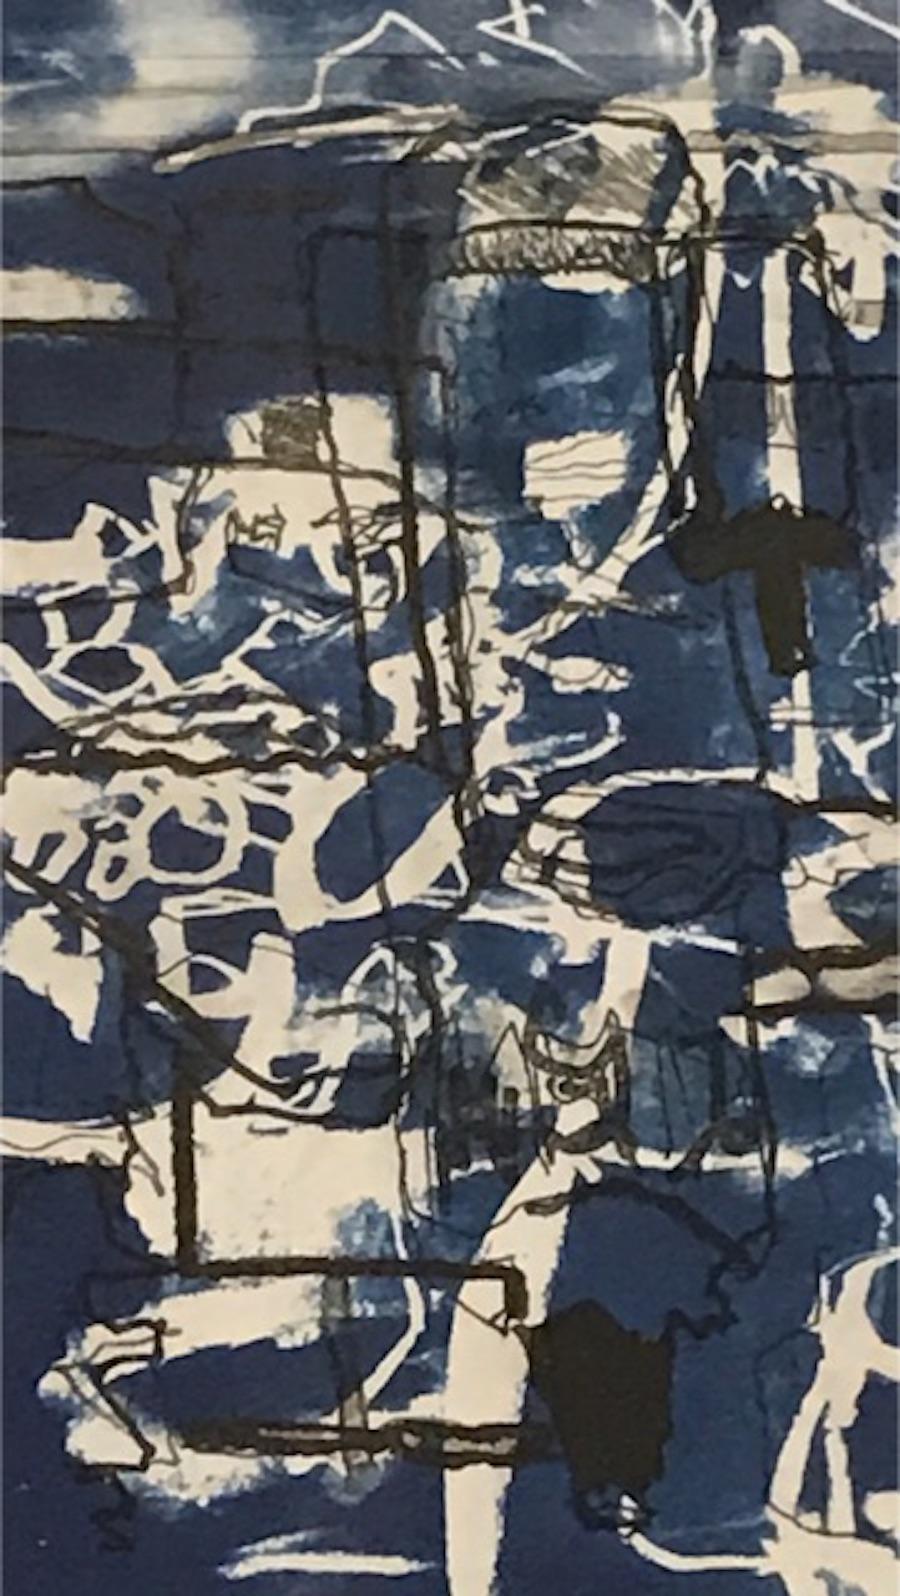 Contemporary American artist Sandra Constantine recreates the effect of an old architects blue print using the print type cyanotype developed by an English scientist, John Frederick William Herschel in 1842.
Cyanotype is made by coating paper with